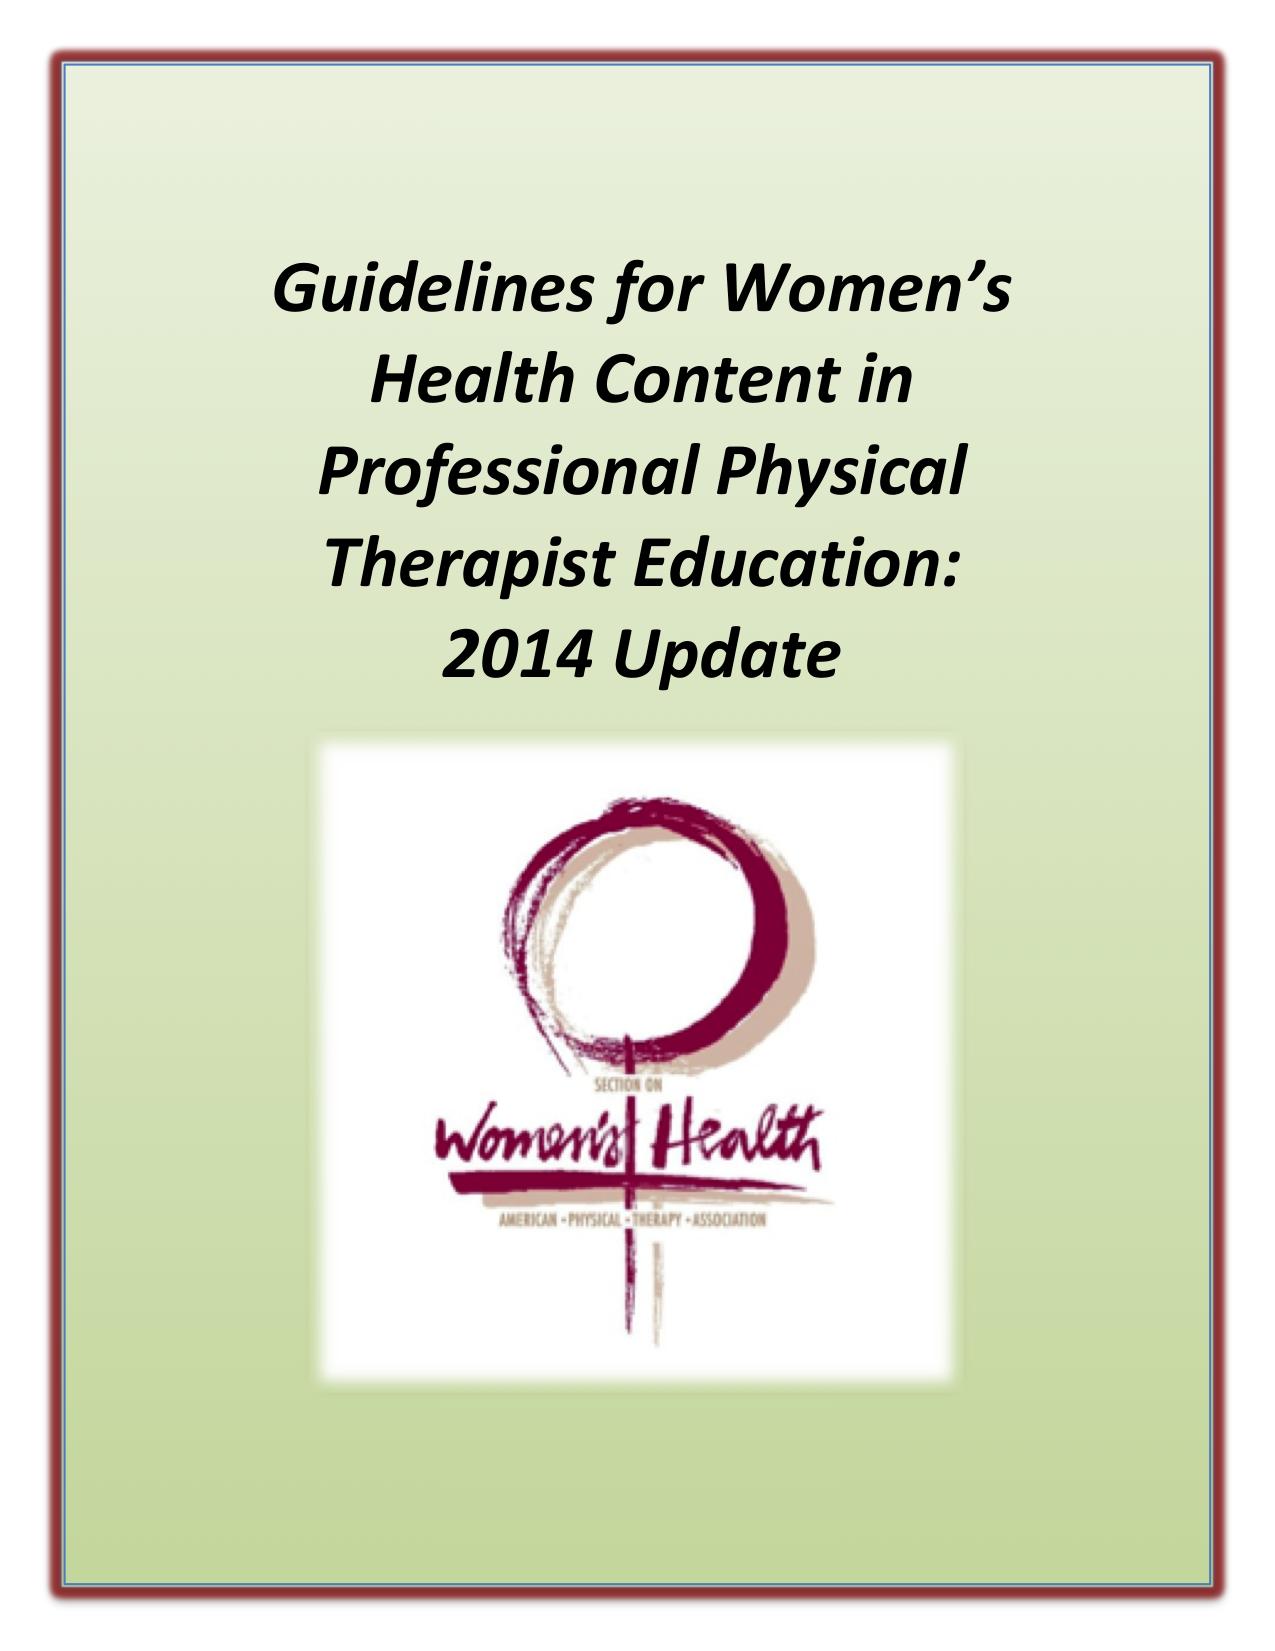 Guidelines for Women's Health Content in Professional Physical Therapist Education 2014